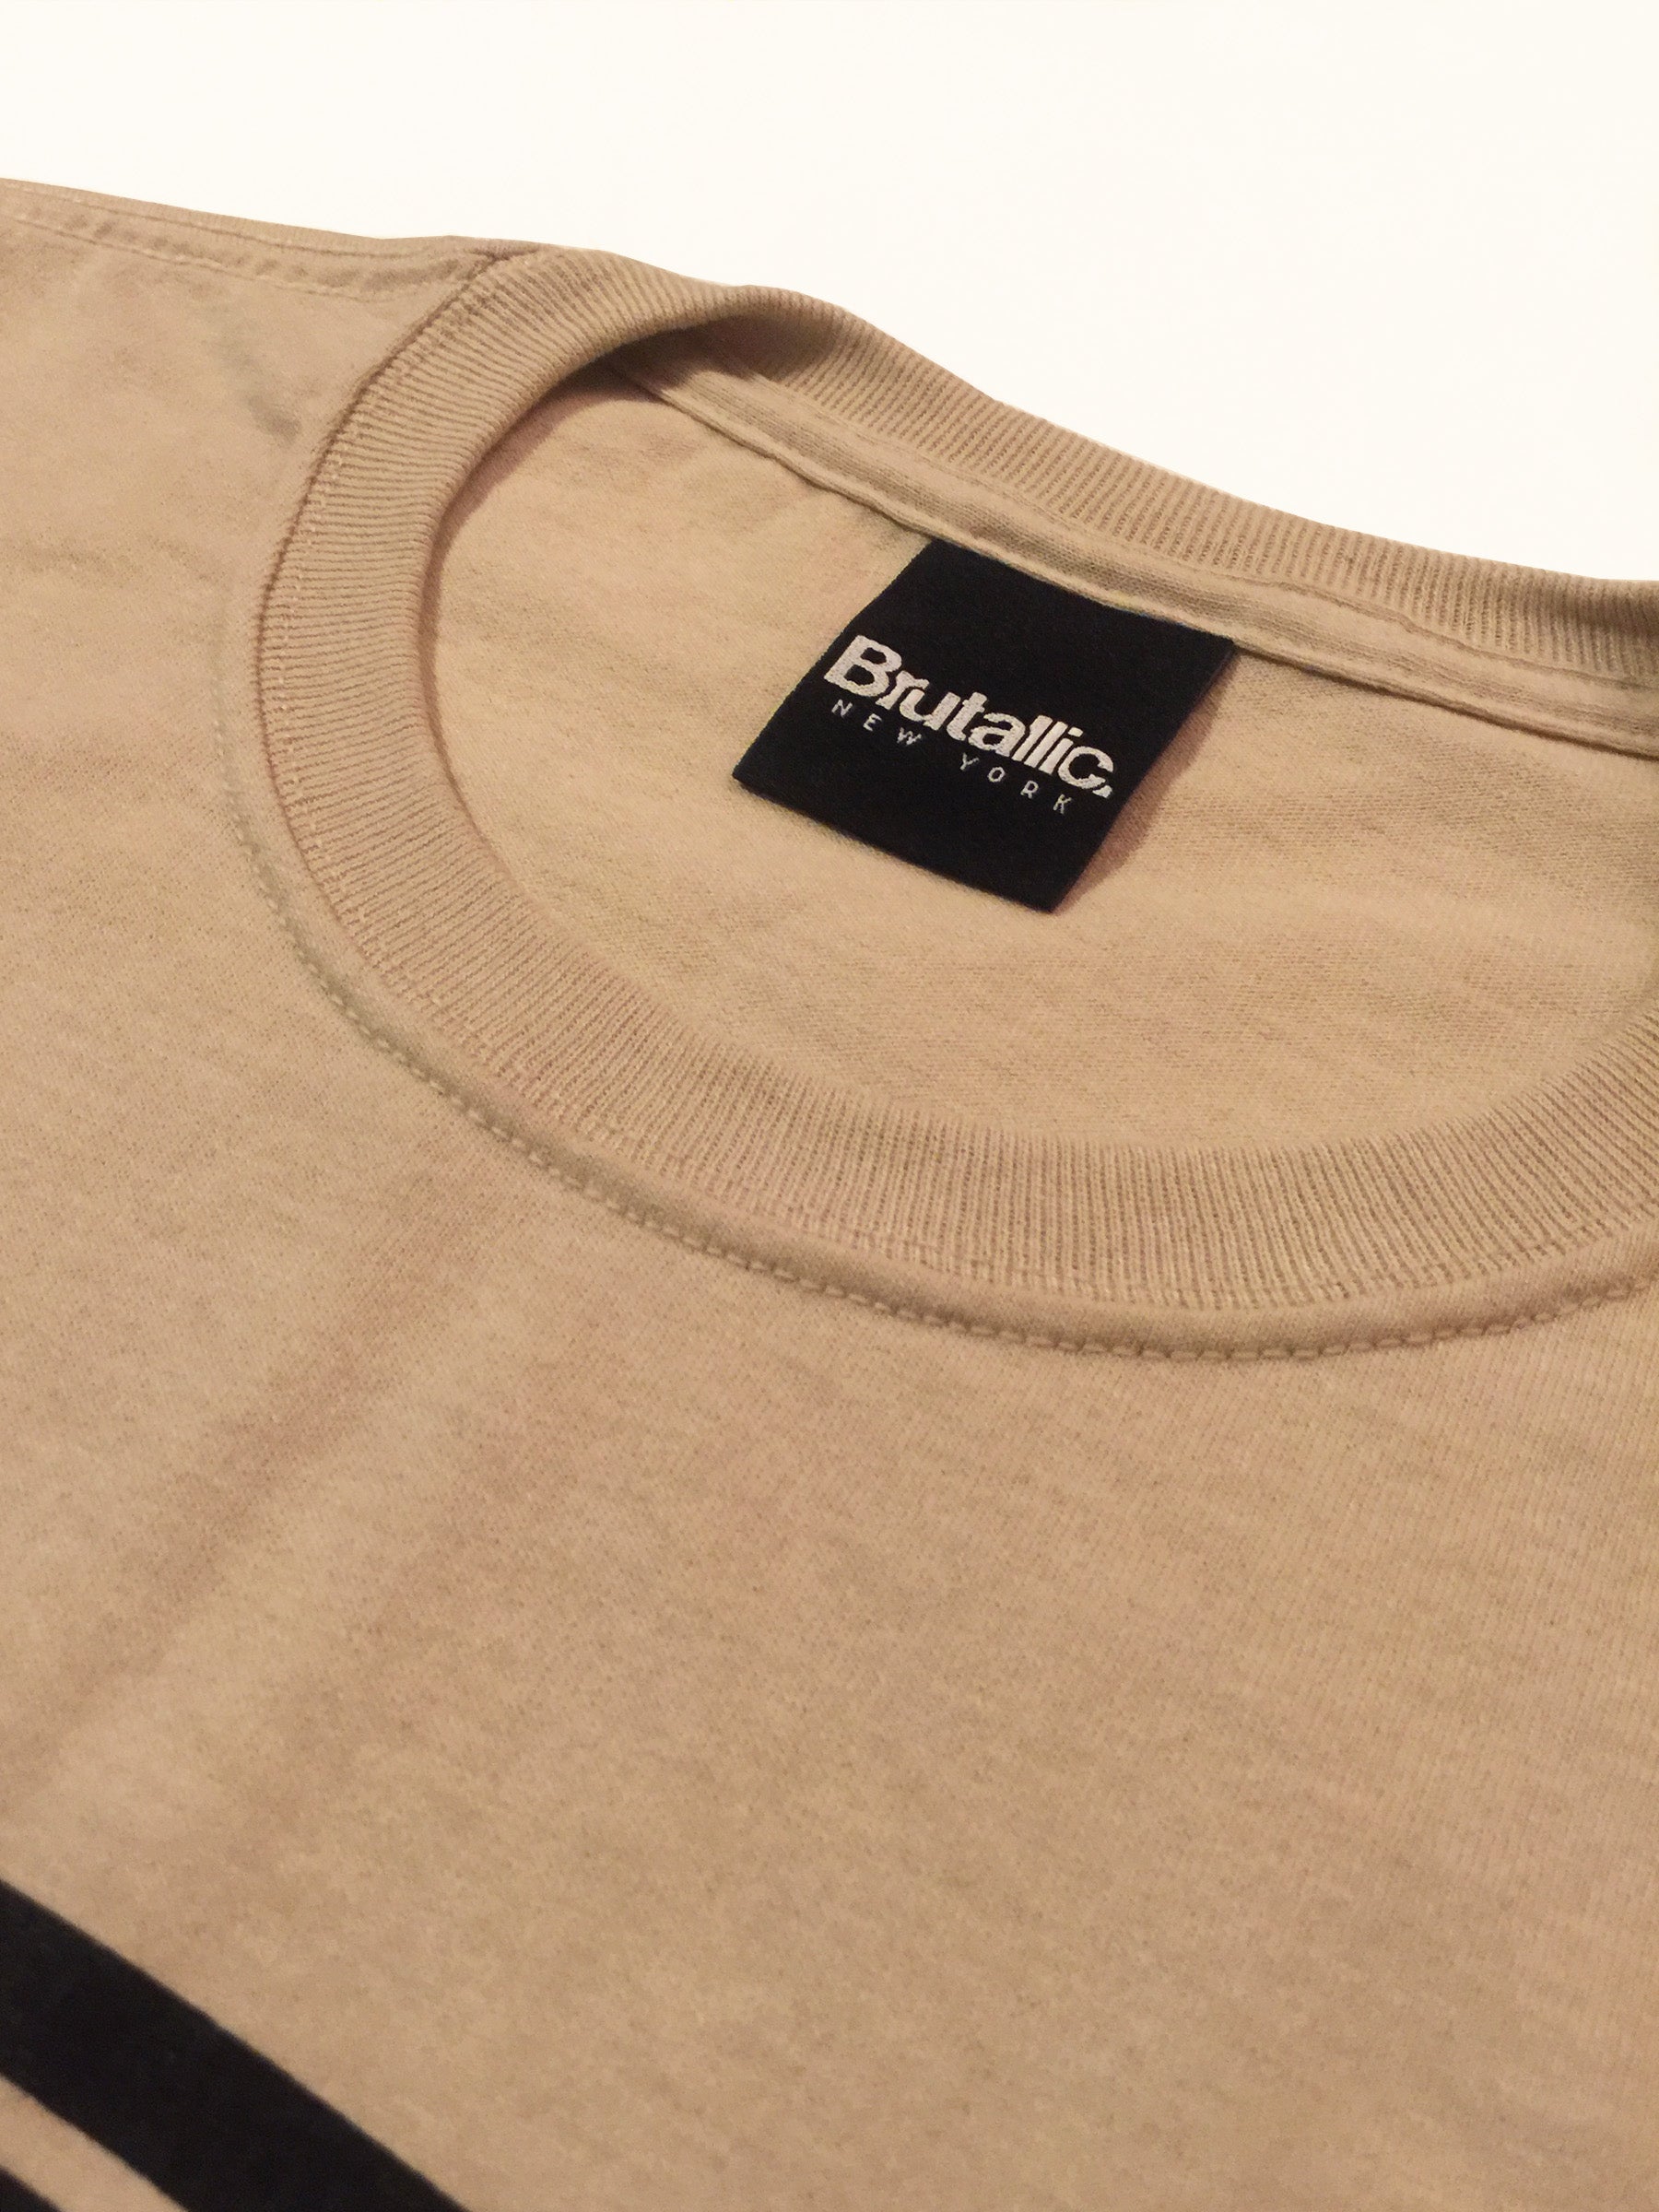 brutallic bubble tee shirt close up of neck label collar with woven neck tag, sand khaki beige color